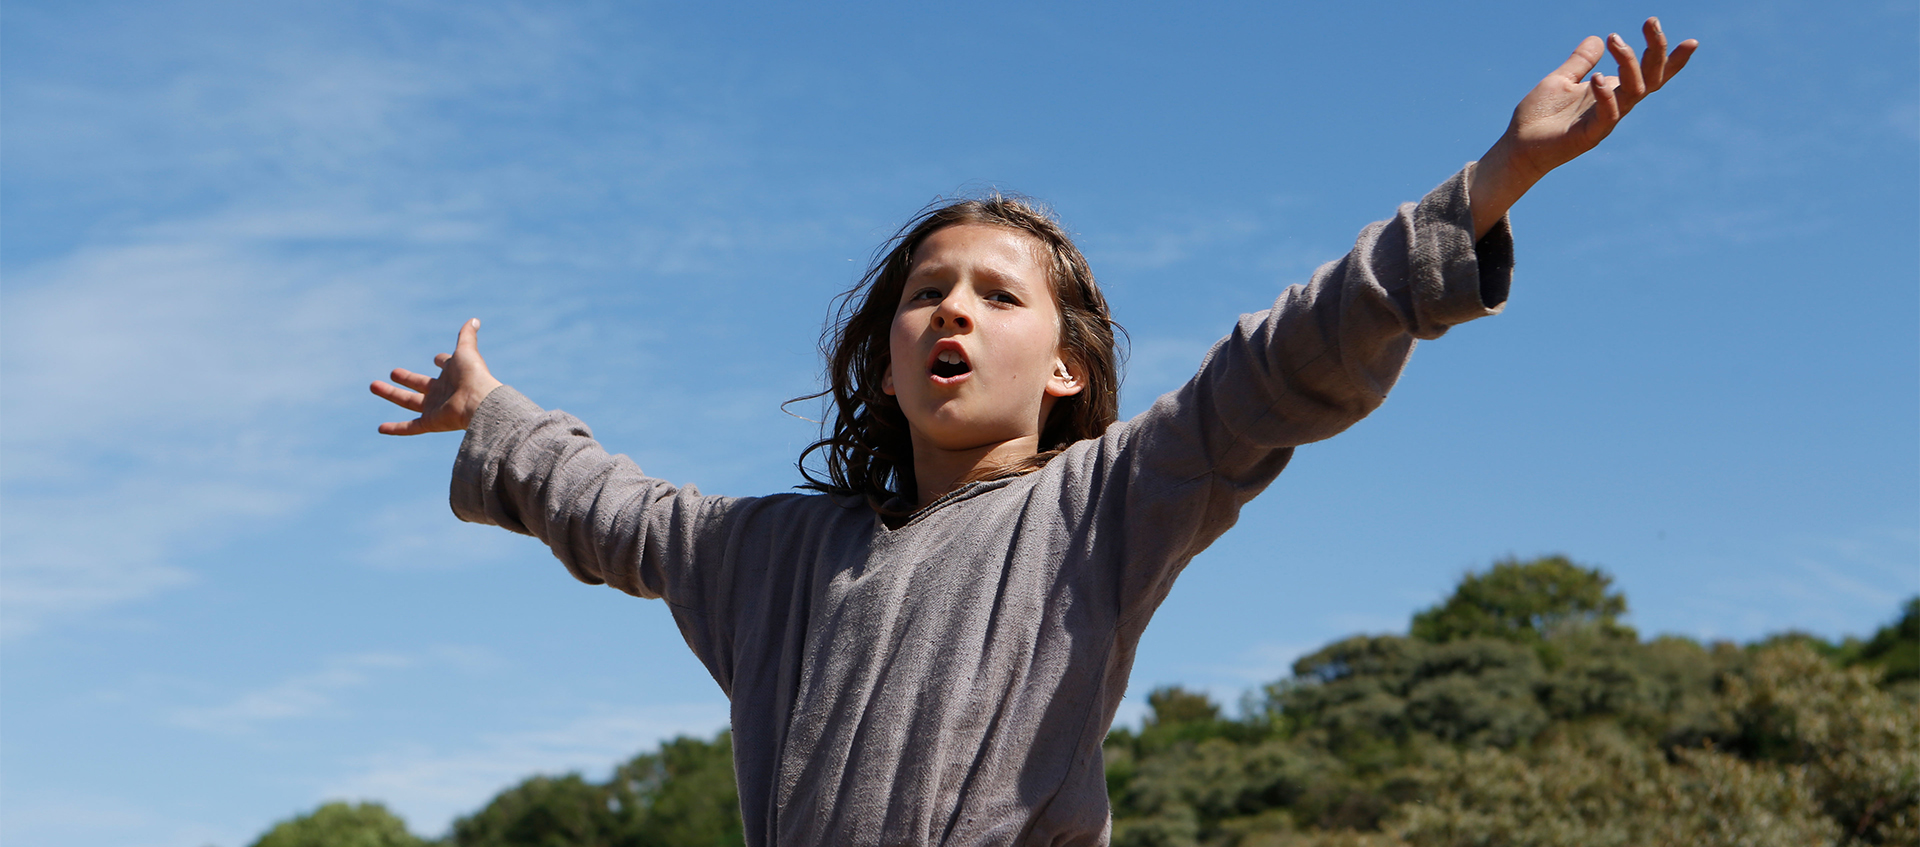 Promotional still image of a young woman singing with arms outstretched, from the 2018 Bruno Dumont film Jeannette: The Early Childhood of Joan of Arc